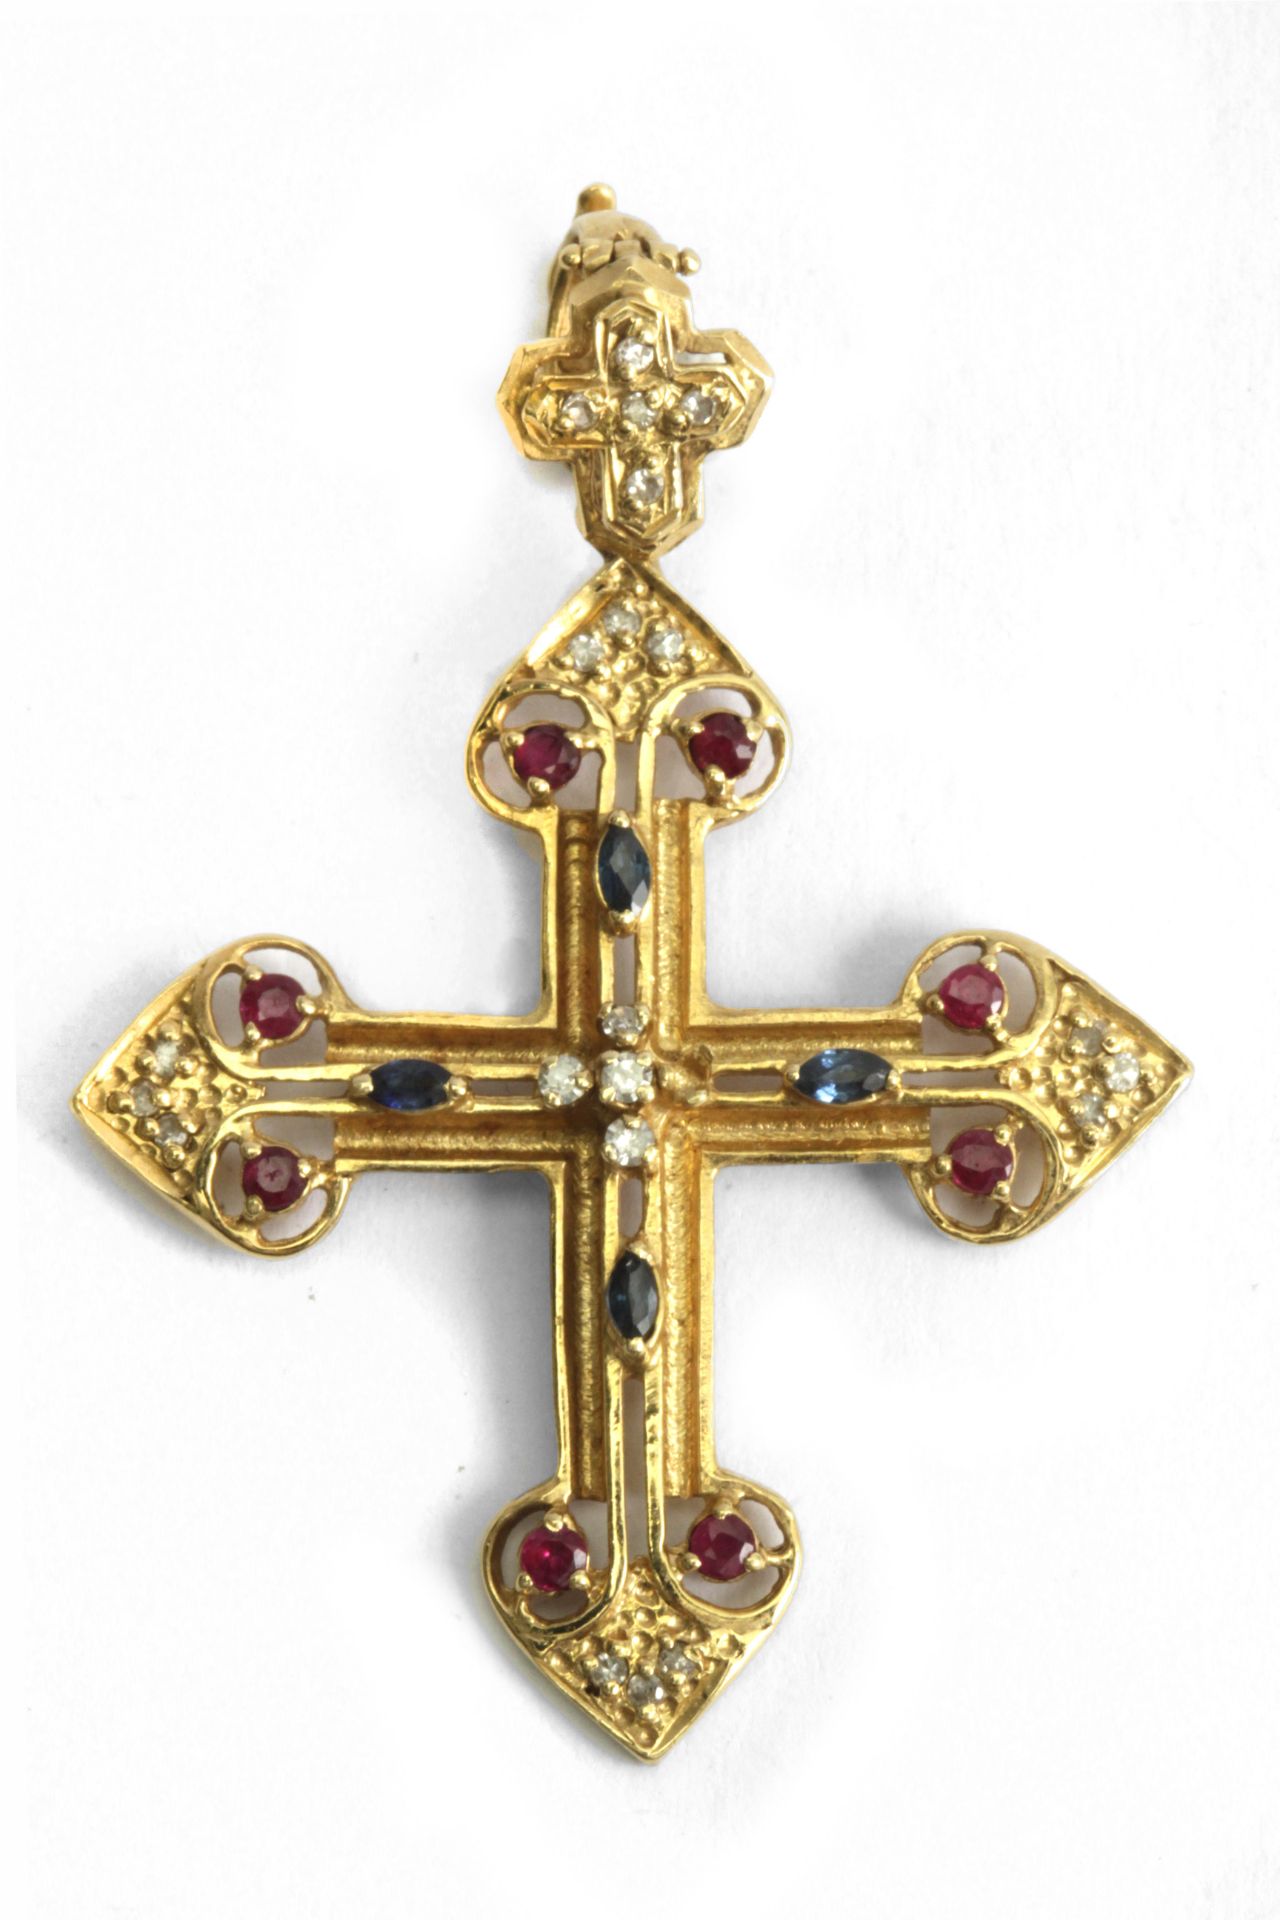 A sapphire, ruby and diamond pendant cross with an 18k., yellow gold setting